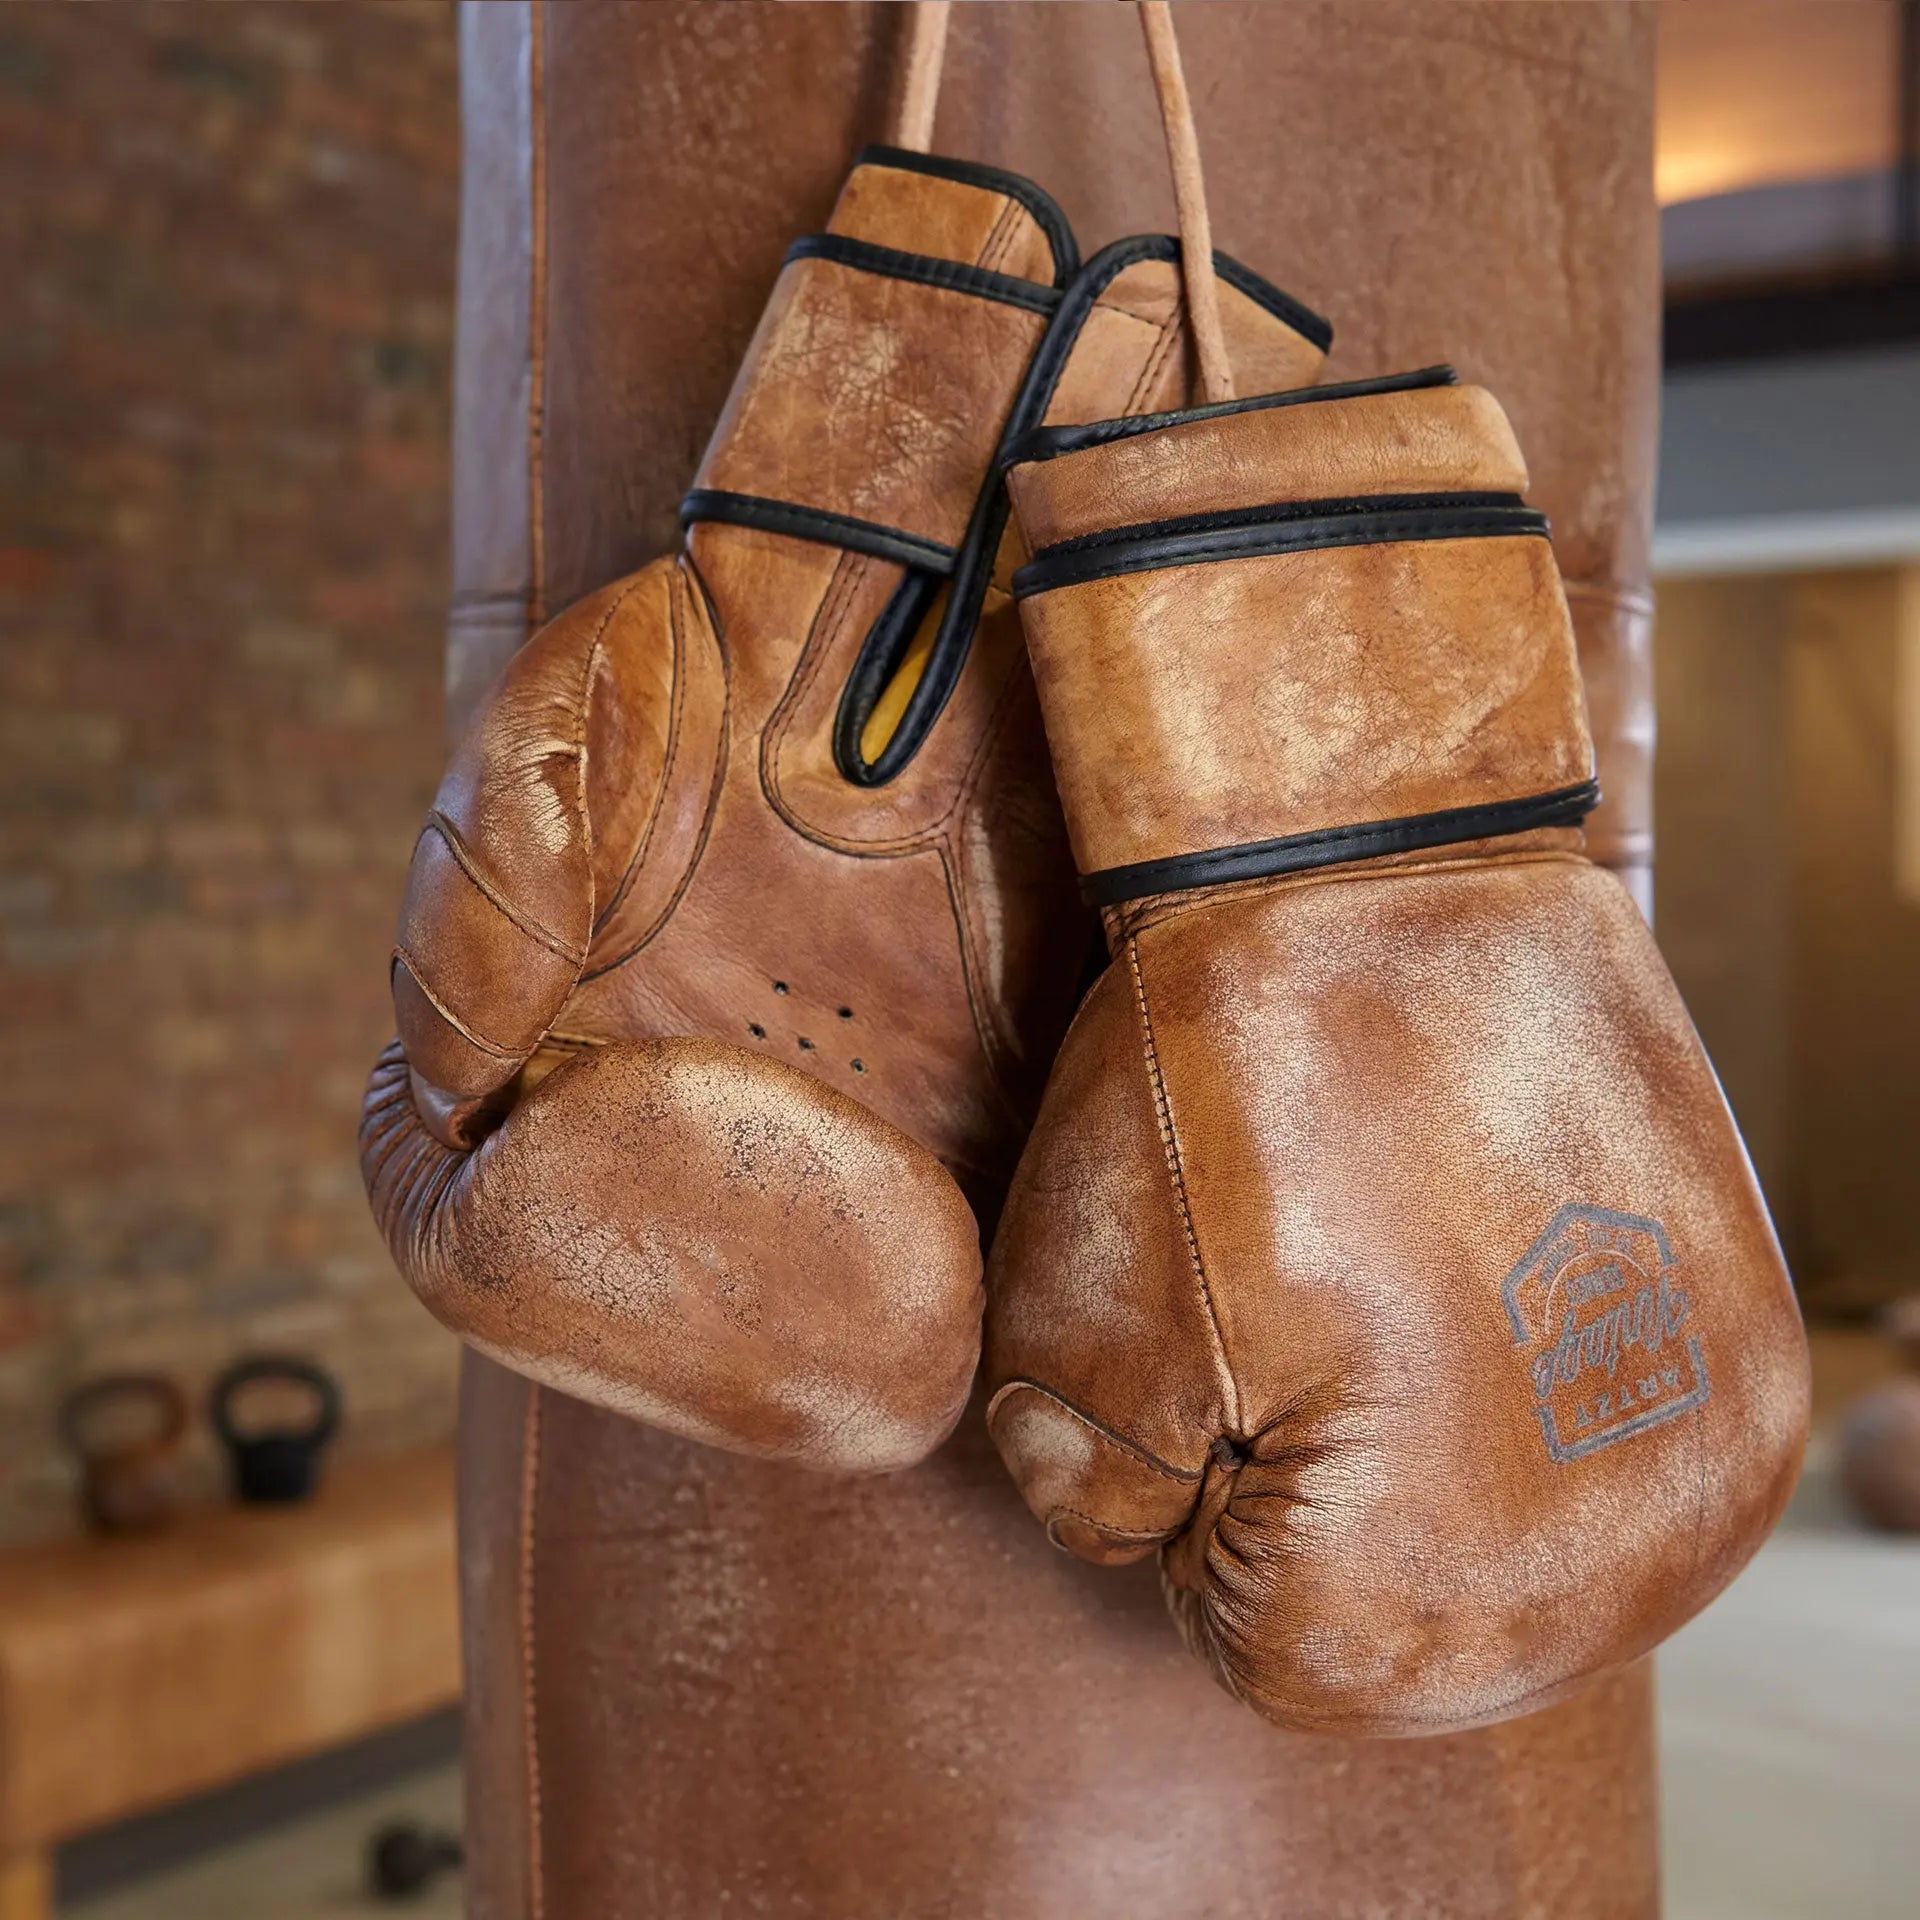 Buy boxing gloves in a retro look ARTZT Vintage Series